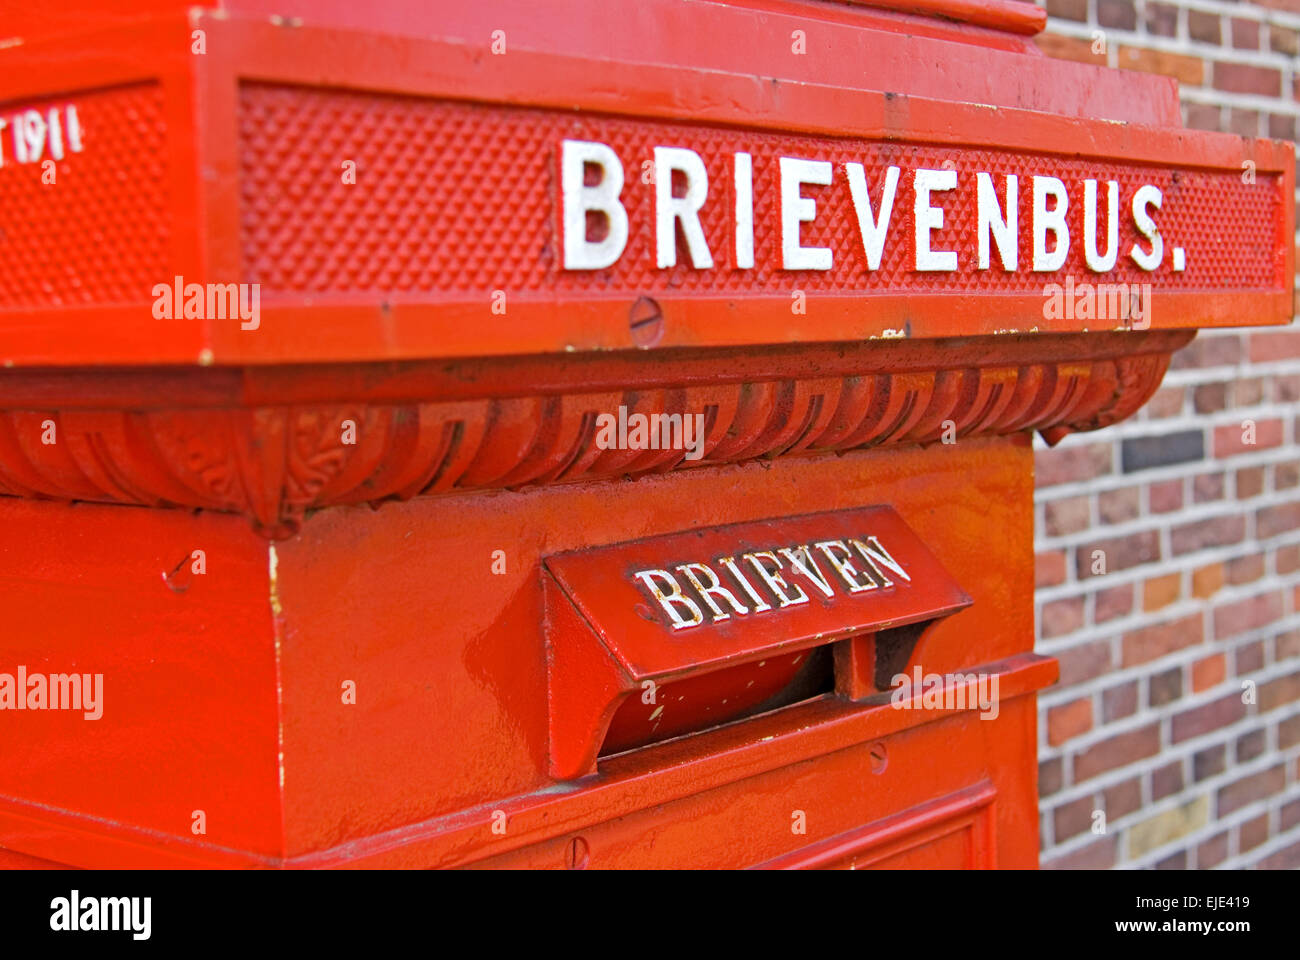 Old red post box at Zaanse Schans north of Amsterdam Stock Photo